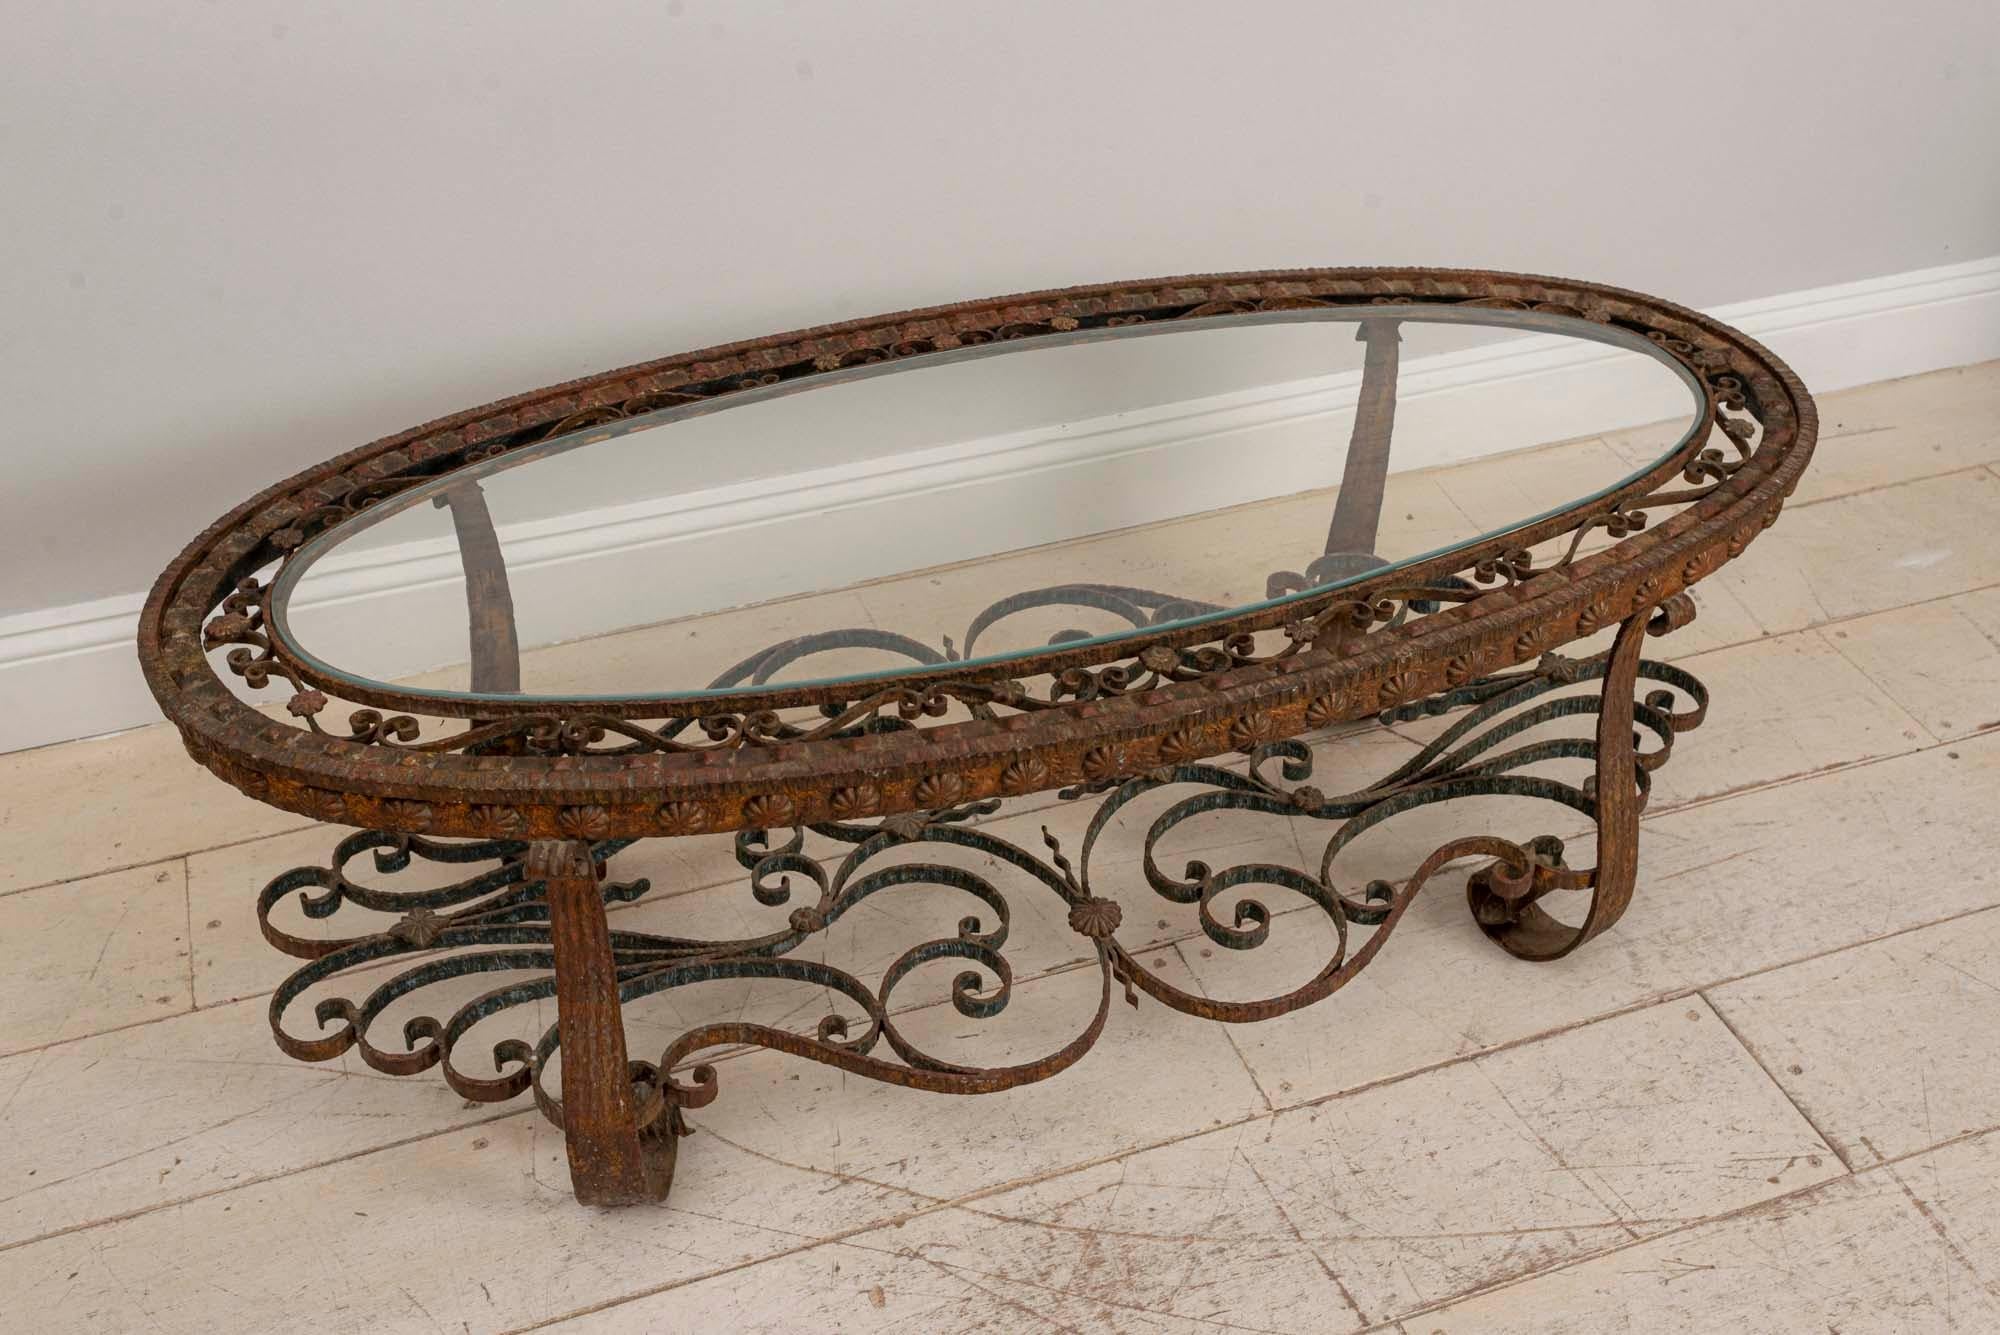 A stunning and extremely decorative oval-shaped coffee table made from wrought iron. The table top features a toughened glass oval shaped top which is inserted into scrolled wrought iron detail around the perimeter which holds it in place. The shelf